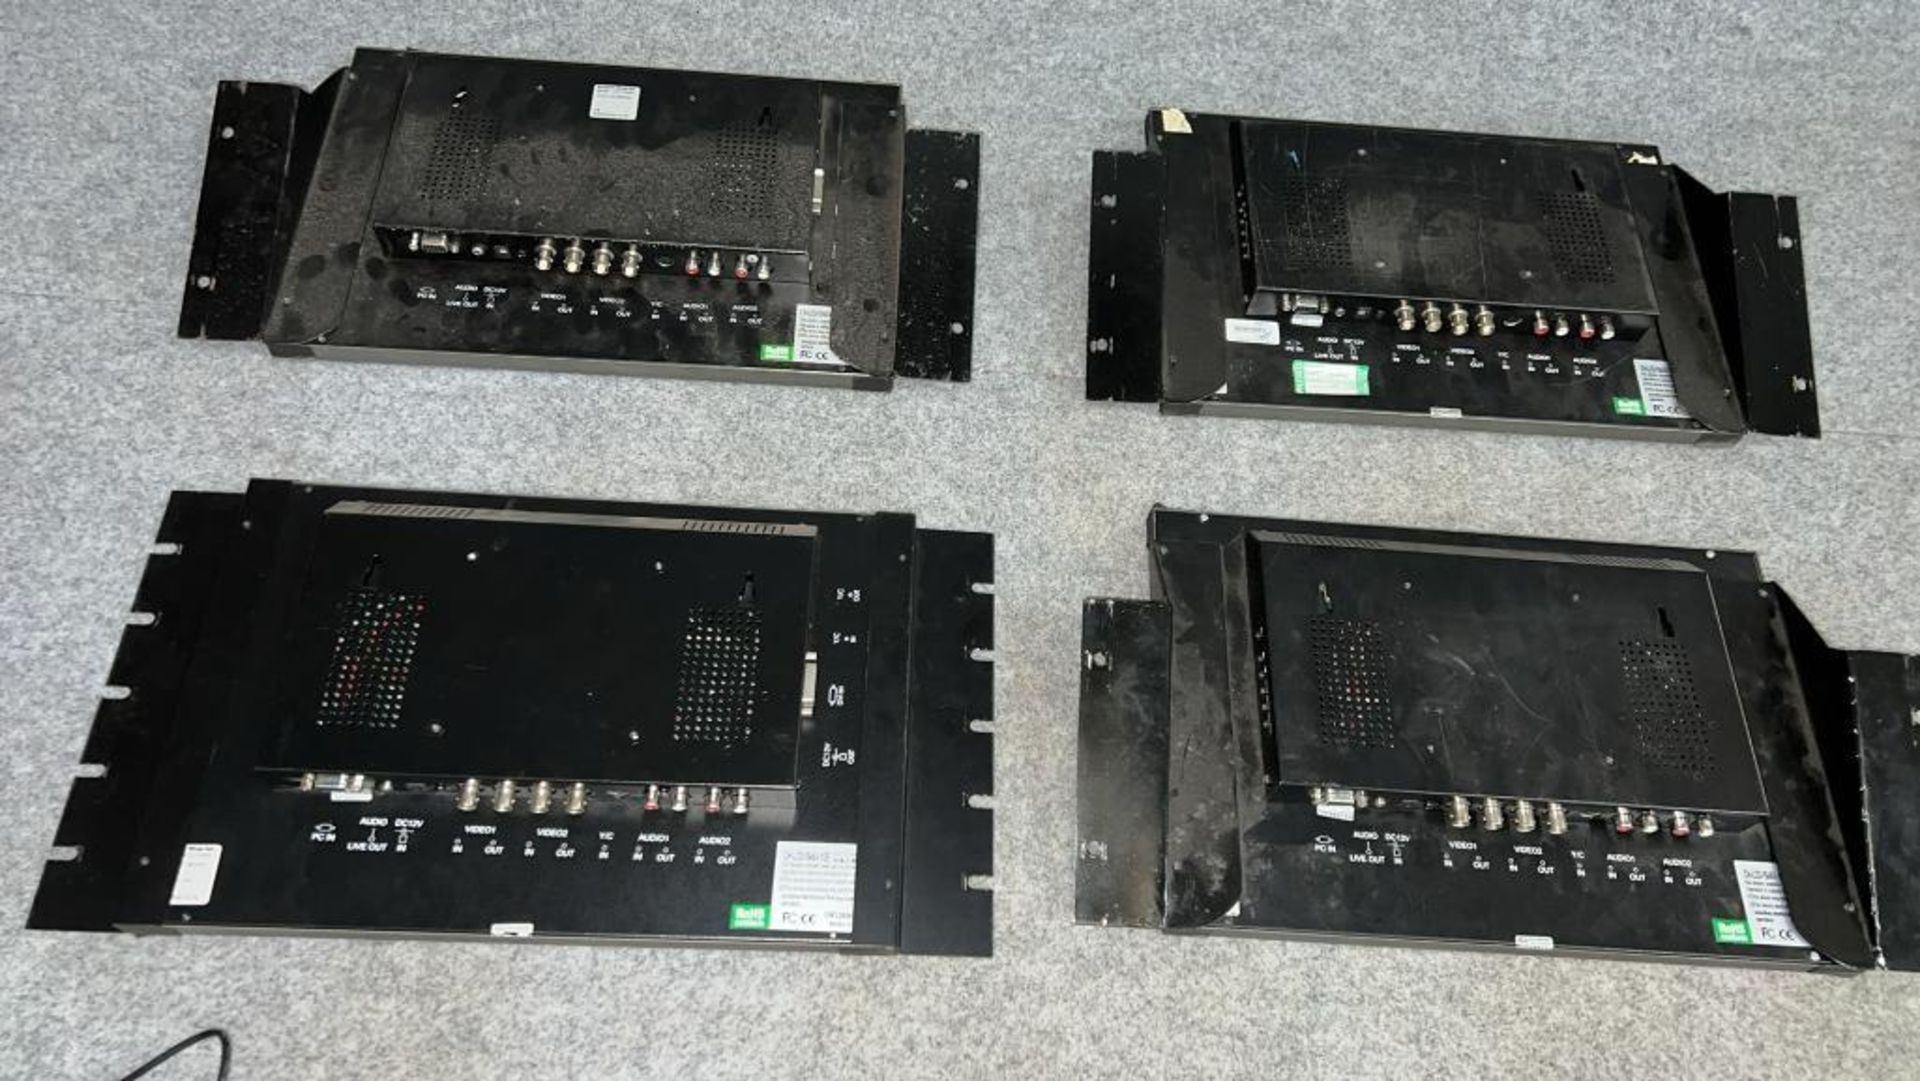 (Qty 4) 15.4"LCD monitors with 4x psu's in two variants of metal mounting brackets Model: CH-LCD 154 - Image 6 of 14